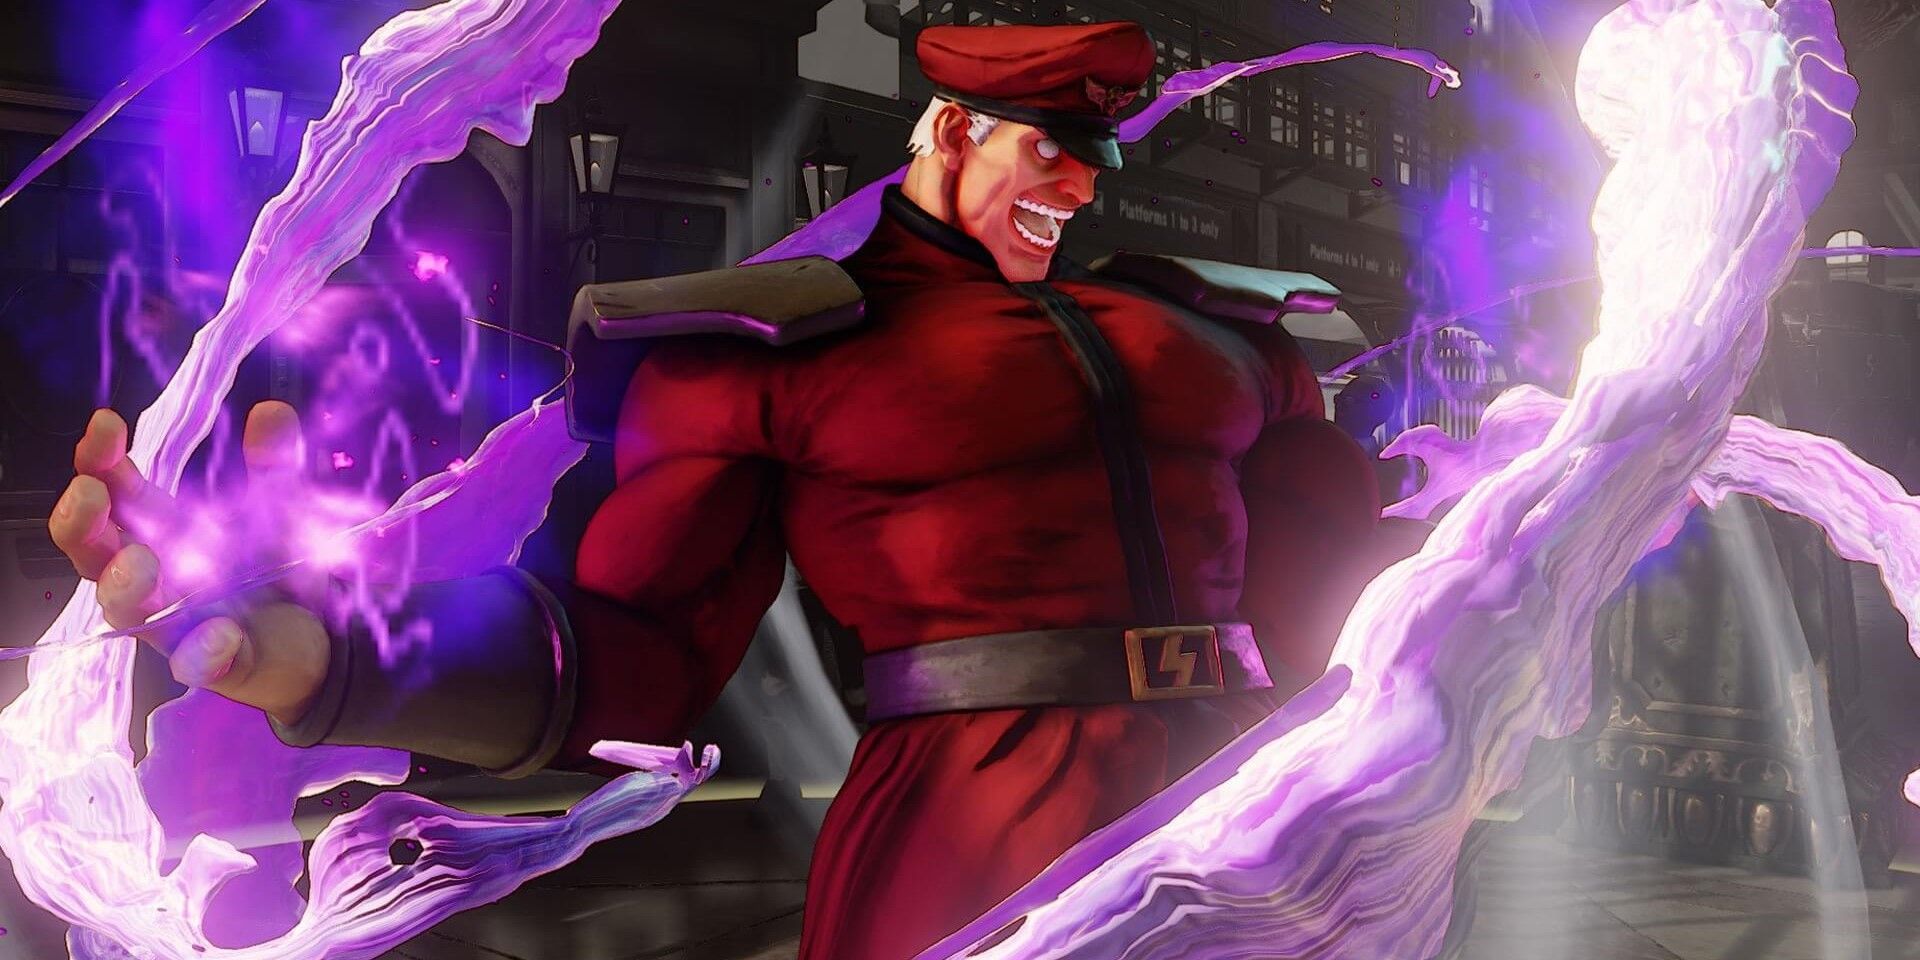 M. Bison Street Fighter Series taunting stance arms extended out